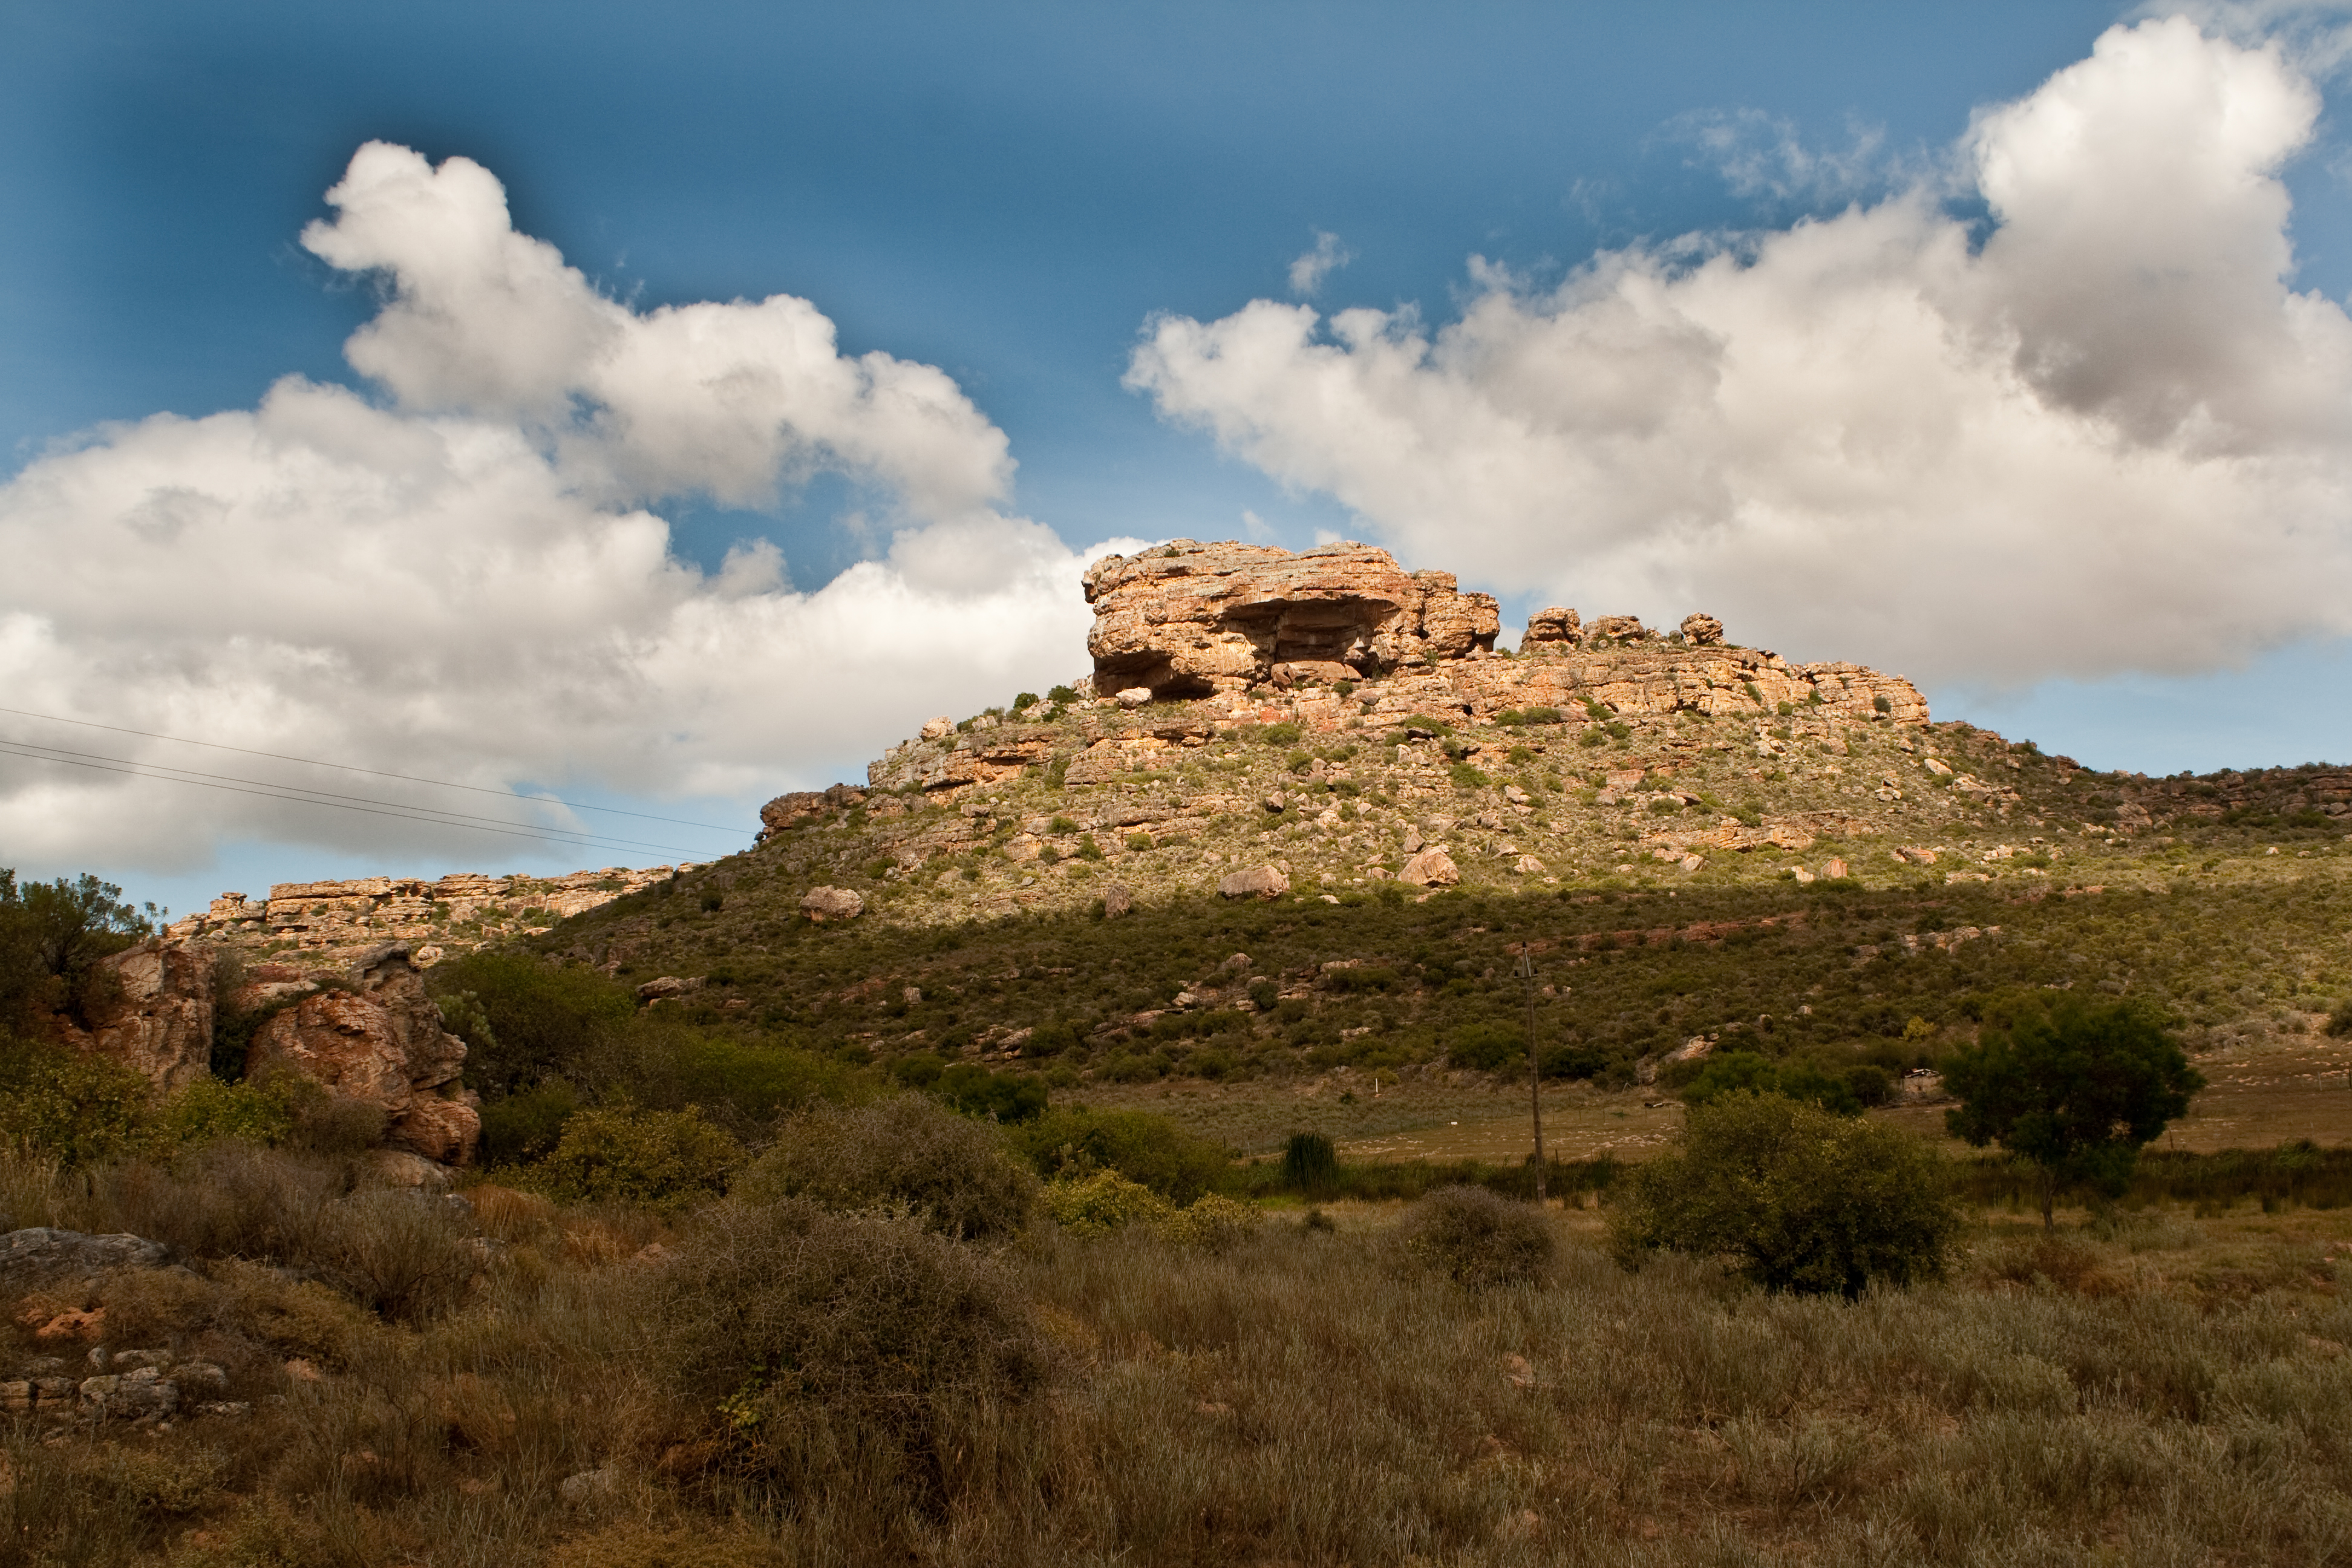 The Middle Stone Age site Diepkloof Rock Shelter in South Africa’s Western Cape province.